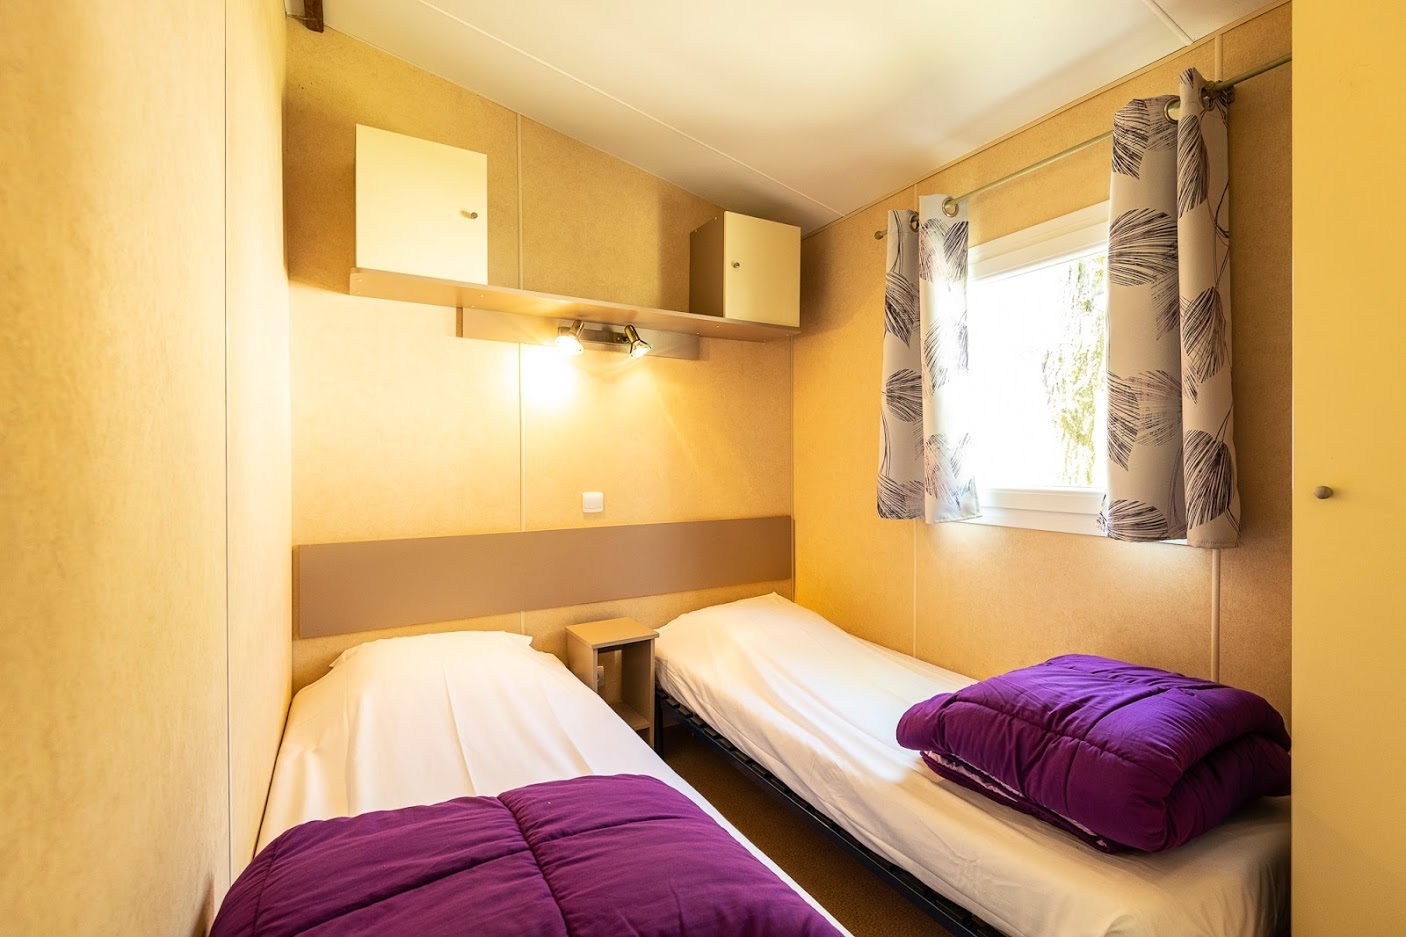 Mobil-home 3 chambres